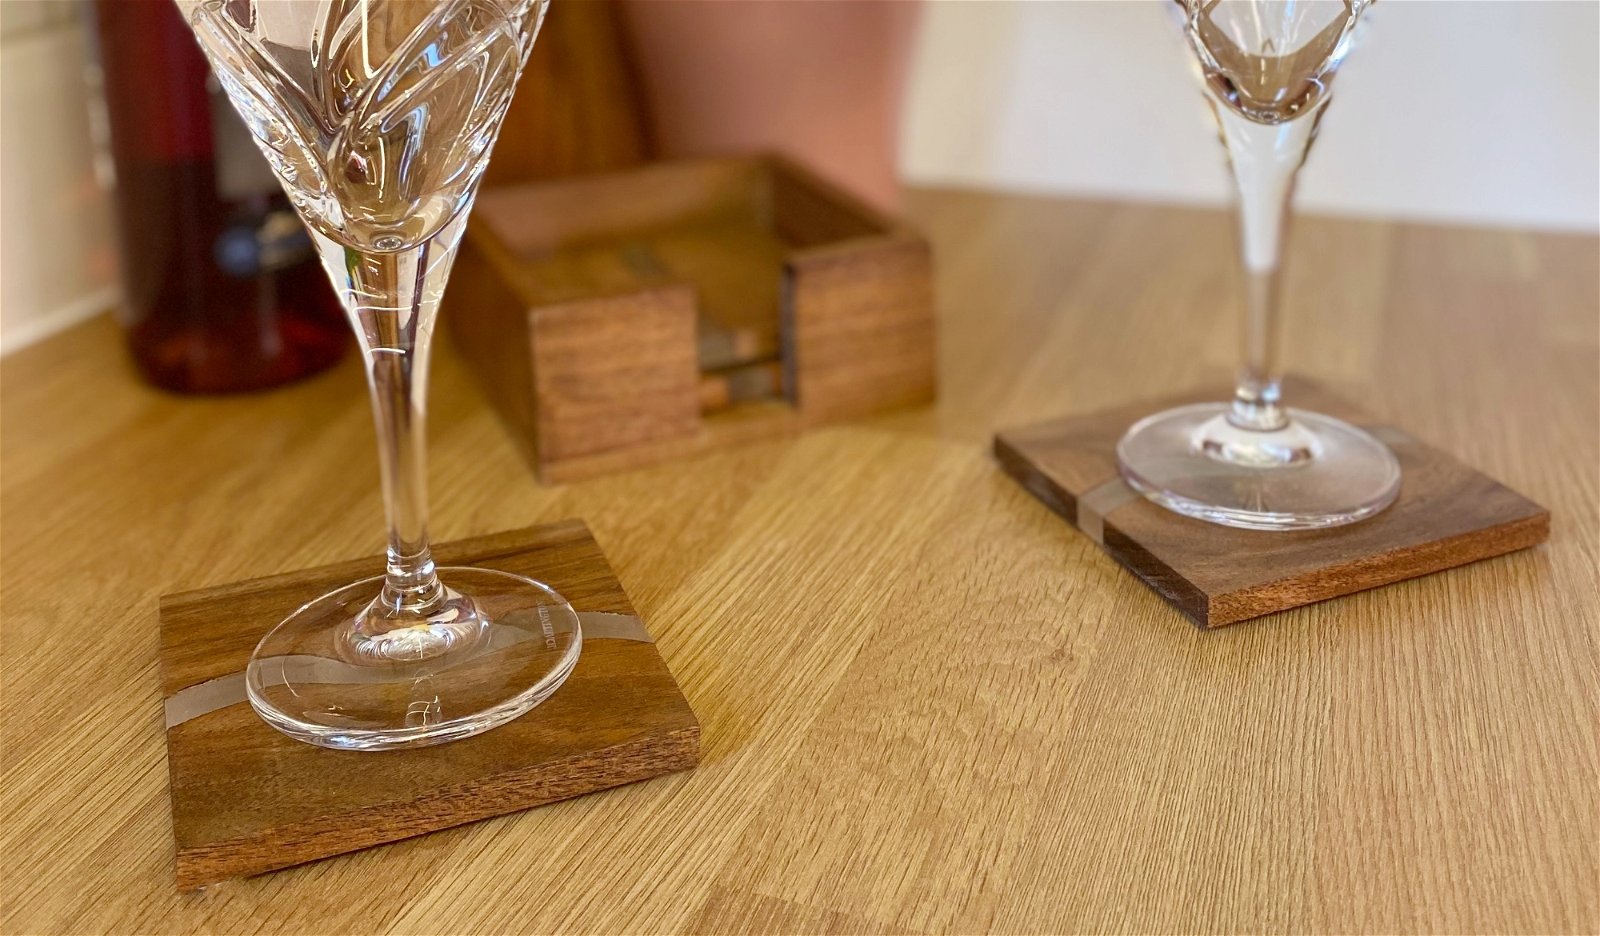 Wooden Wave Design Coasters In A Wooden Holder